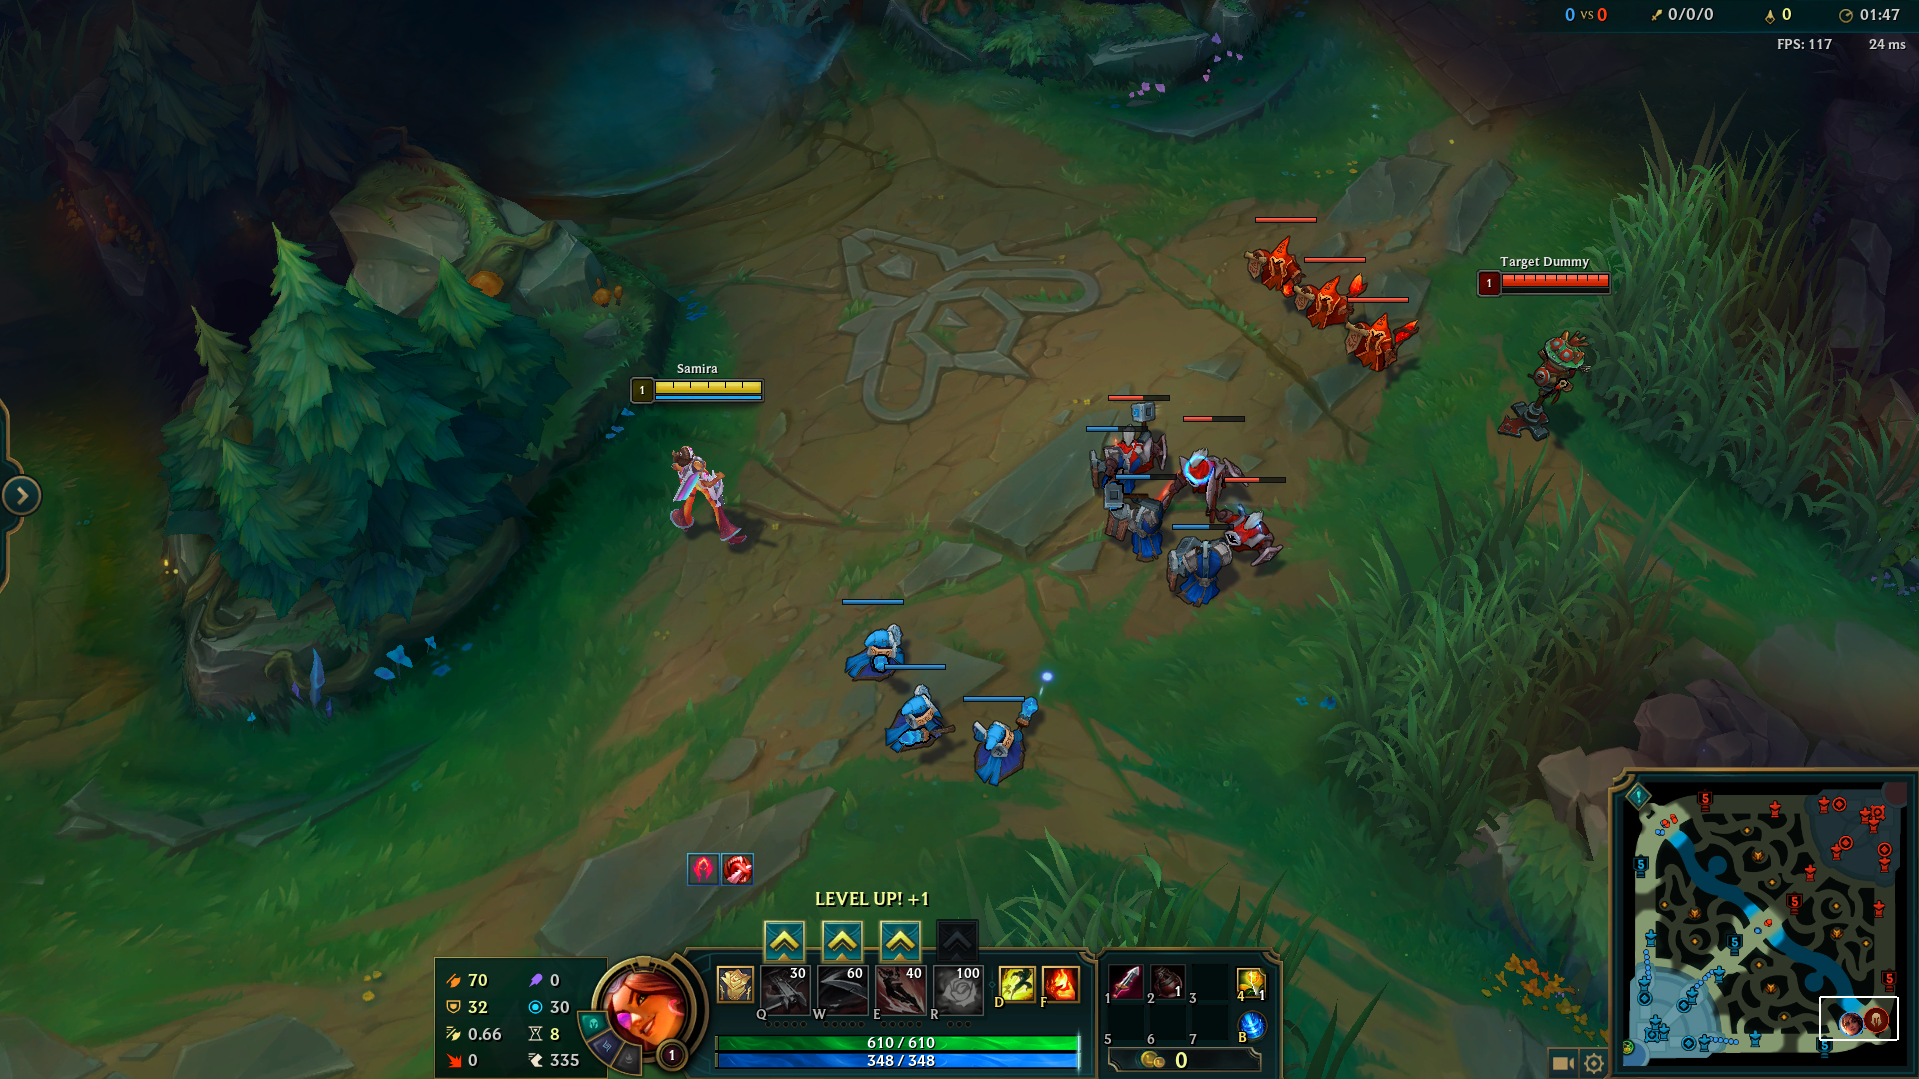 ADC positioning example